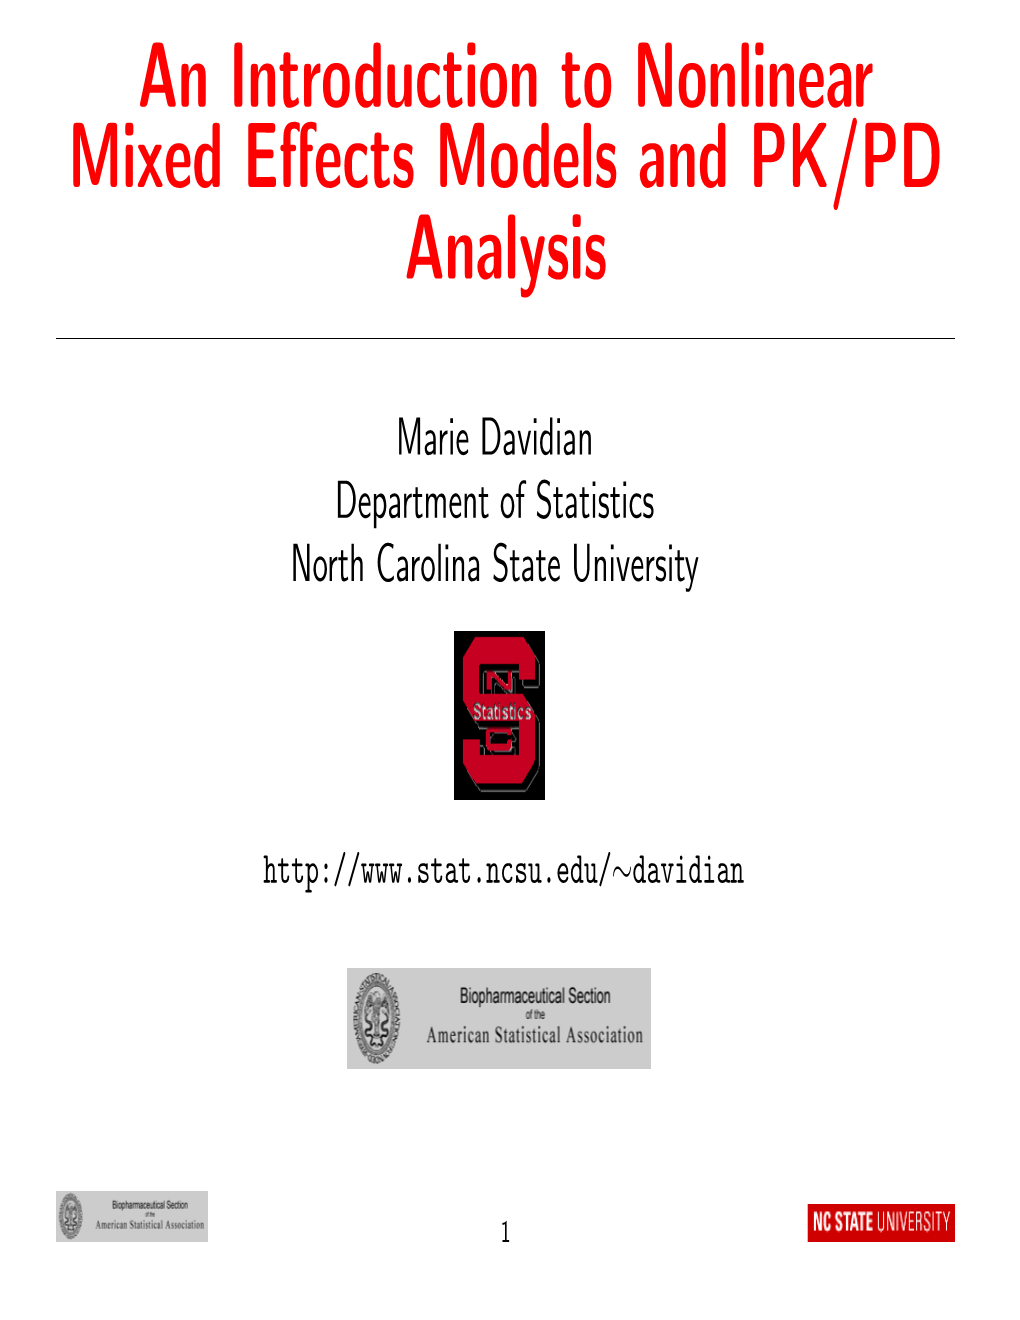 An Introduction to Nonlinear Mixed Effects Models and PK/PD Analysis